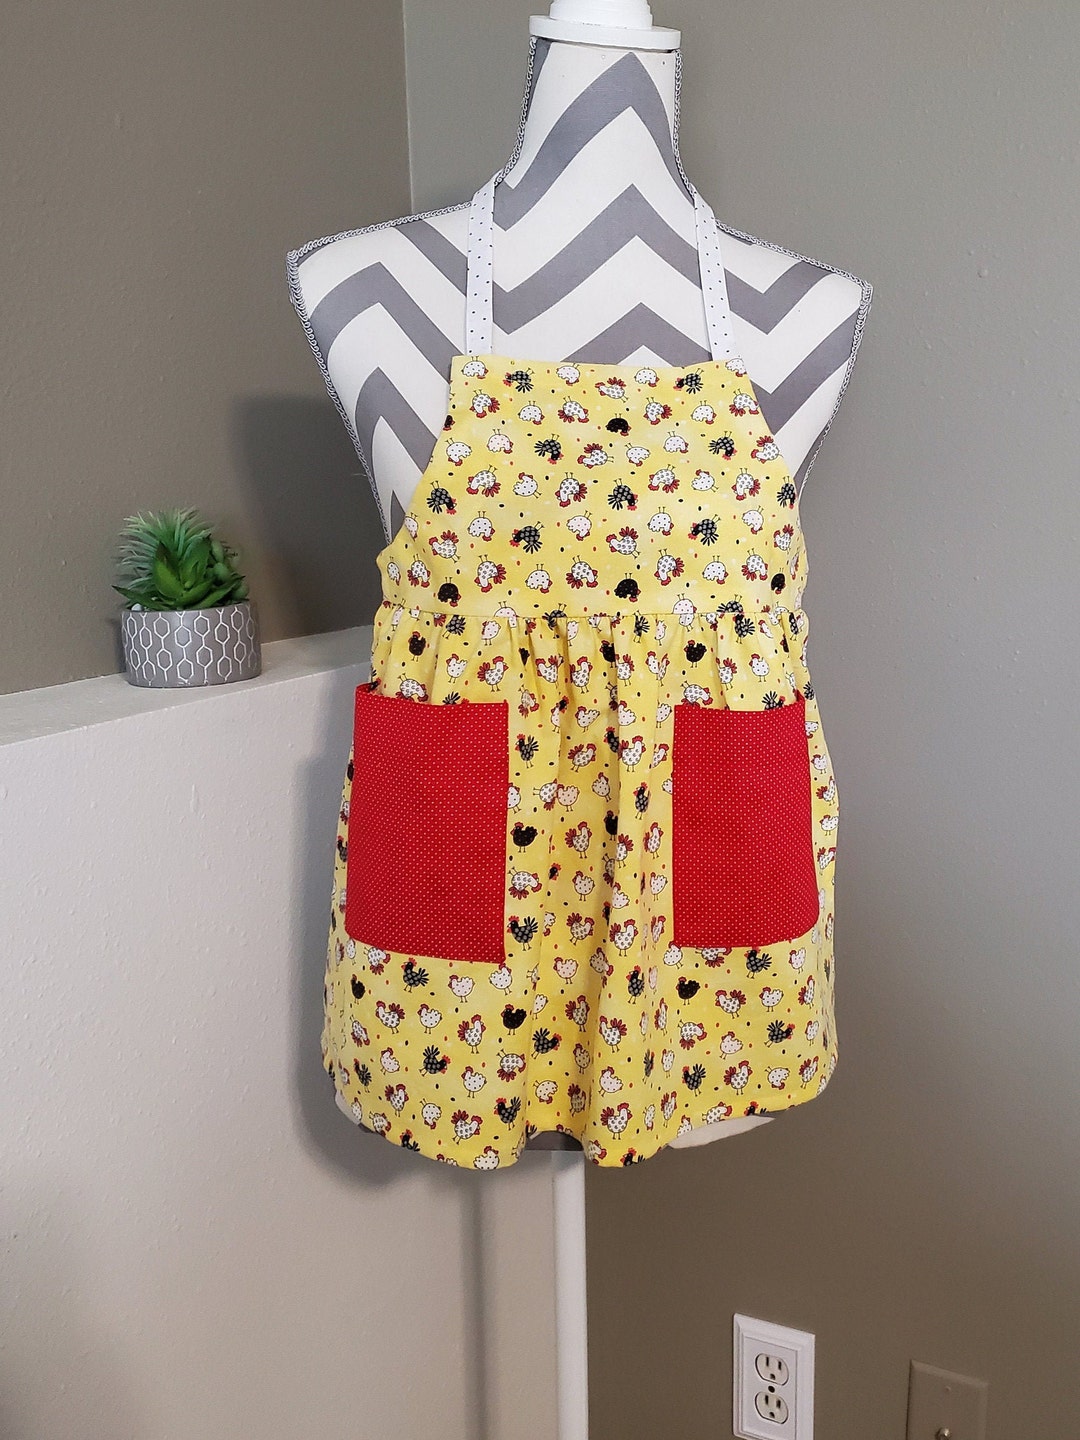 The Apron for Playdough | Aprons for Making Playdoh Yellow